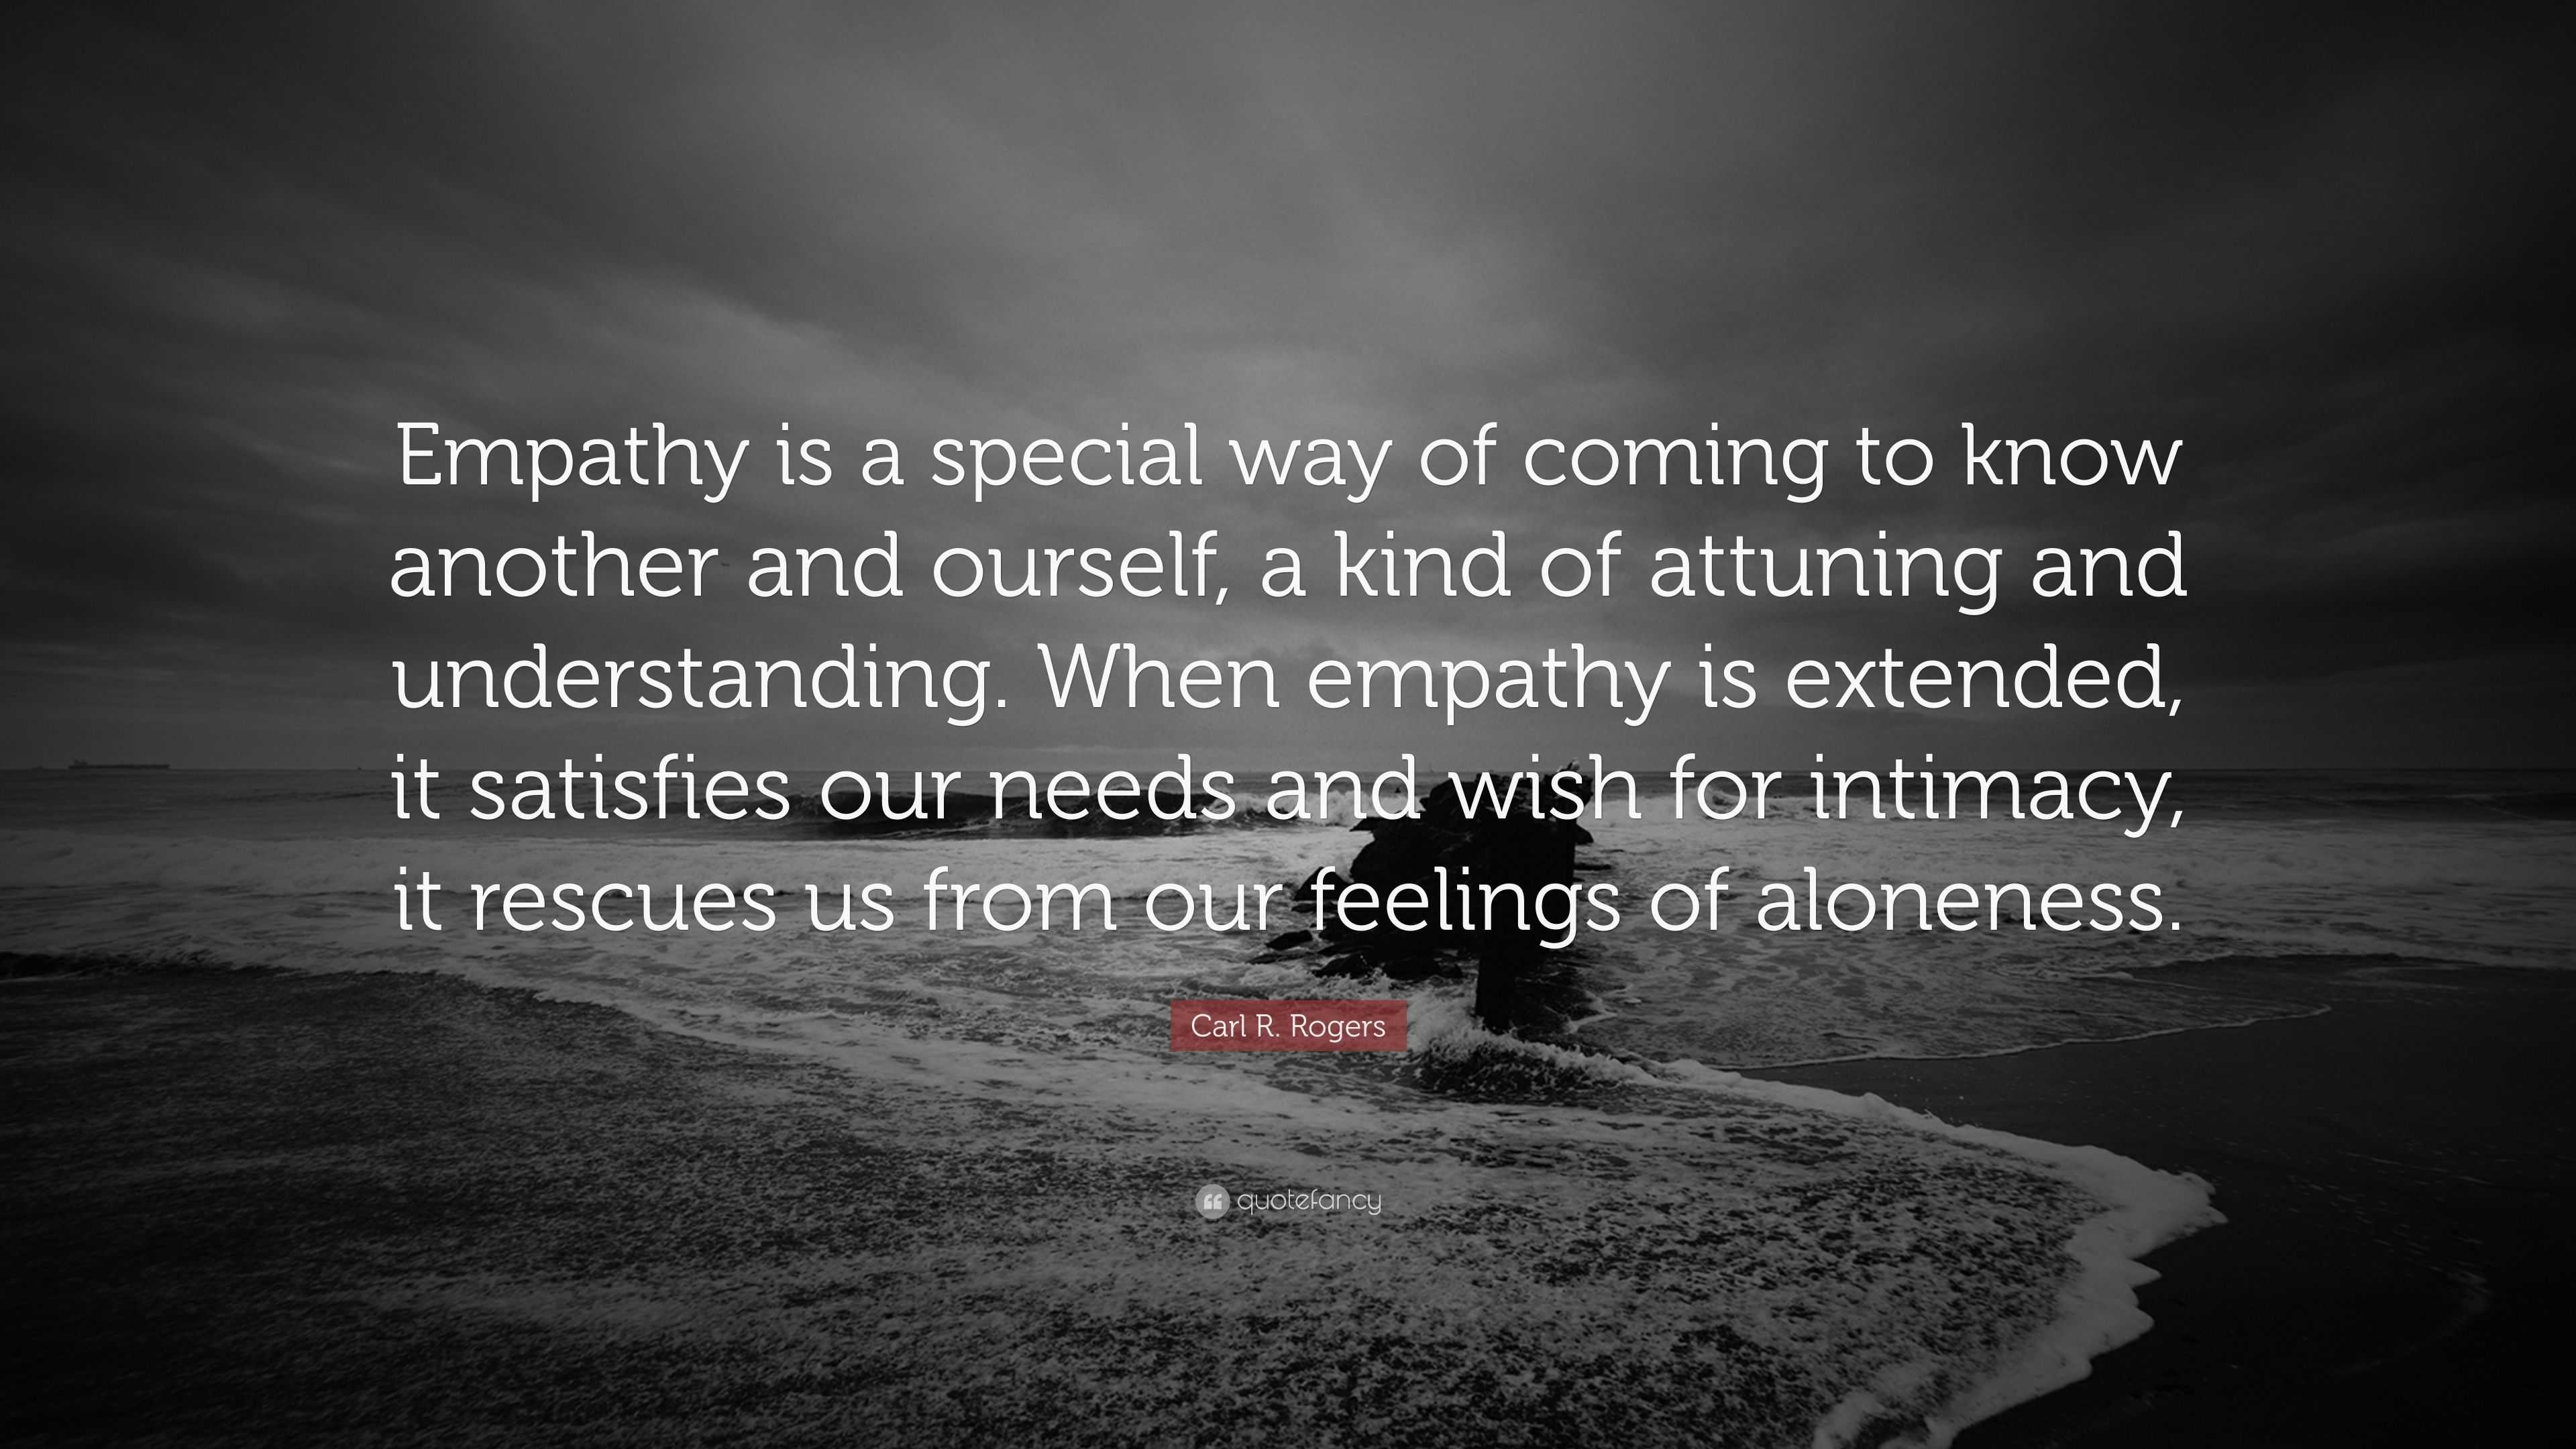 Carl R. Rogers Quote: “Empathy is a special way of coming to know